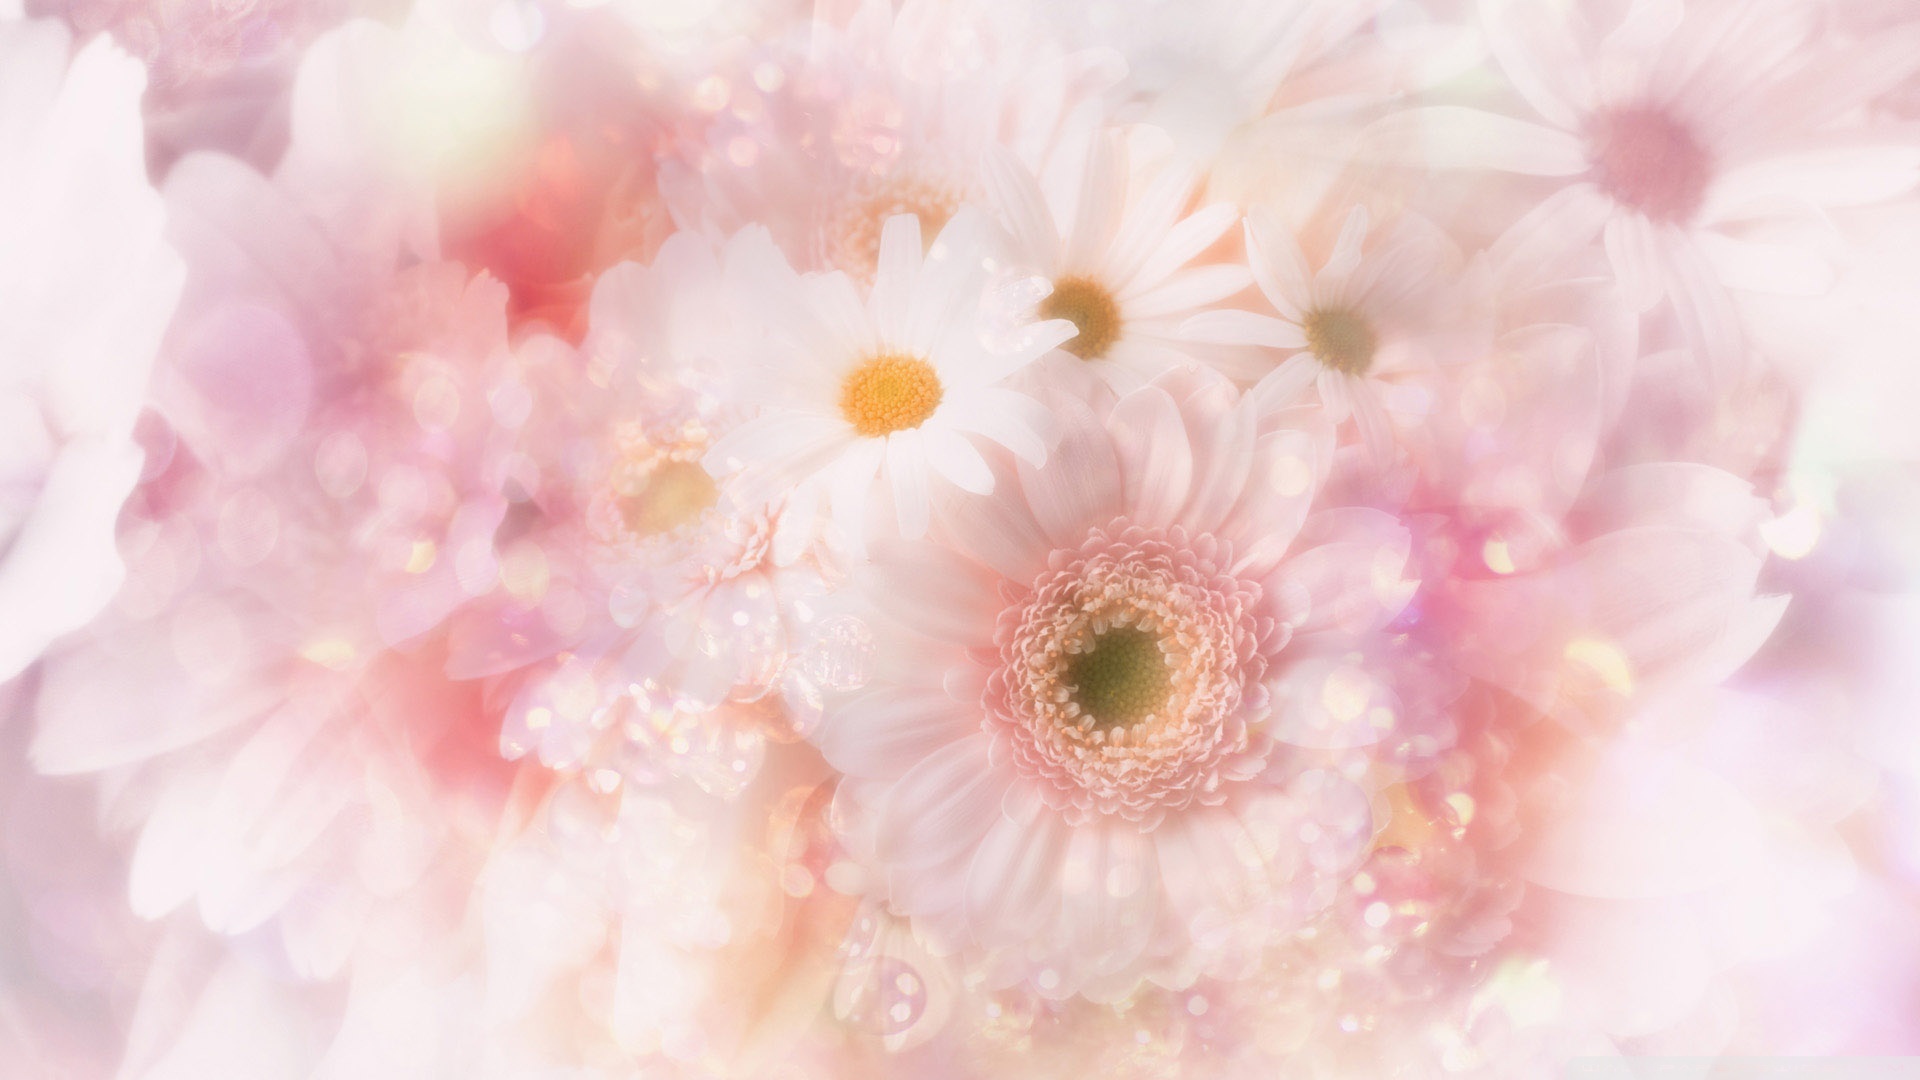 Free Download Gerbera Daisies Flowers 8 Wallpaper 1920x1080 Gerbera Daisies 1920x1080 For Your Desktop Mobile Tablet Explore 68 Gerbera Daisies Wallpaper Gerbera Daisies Wallpaper Daisies Wallpapers Gerbera Wallpapers,Best Canned Cat Food For Constipation